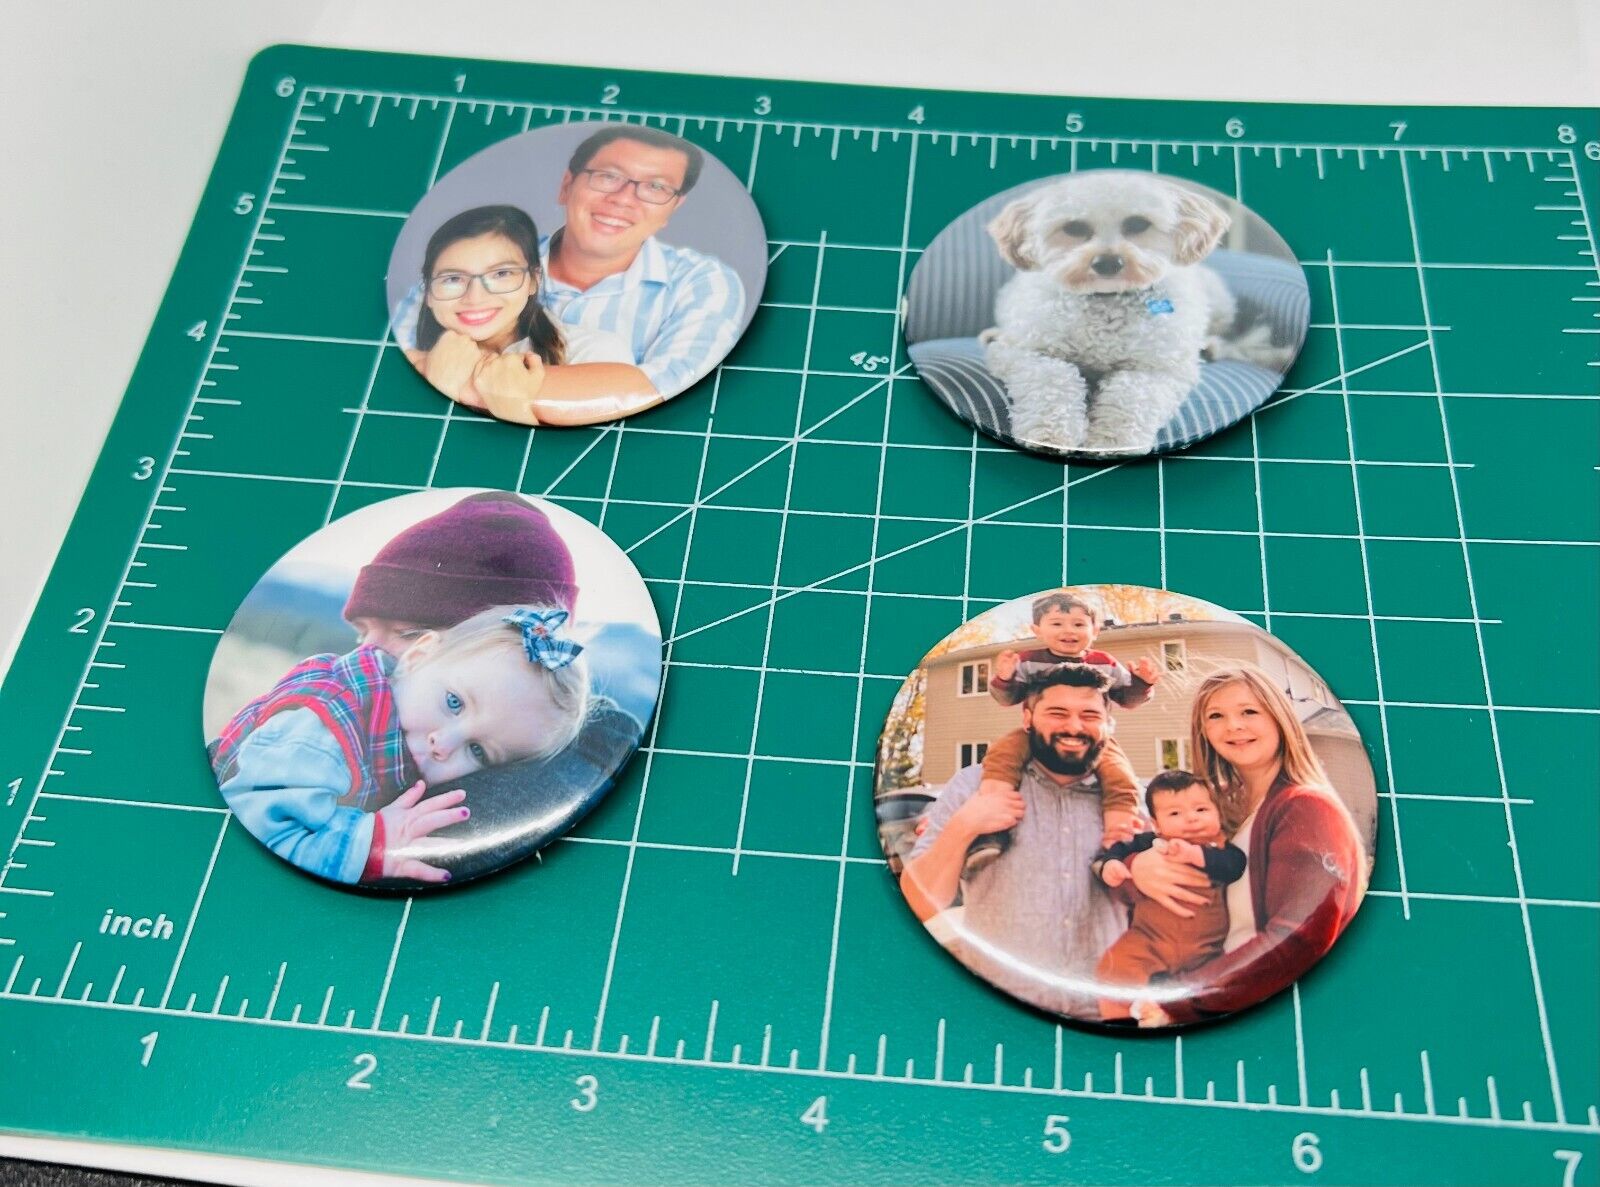 Custom pins 2.25” round pins personalized to your request.